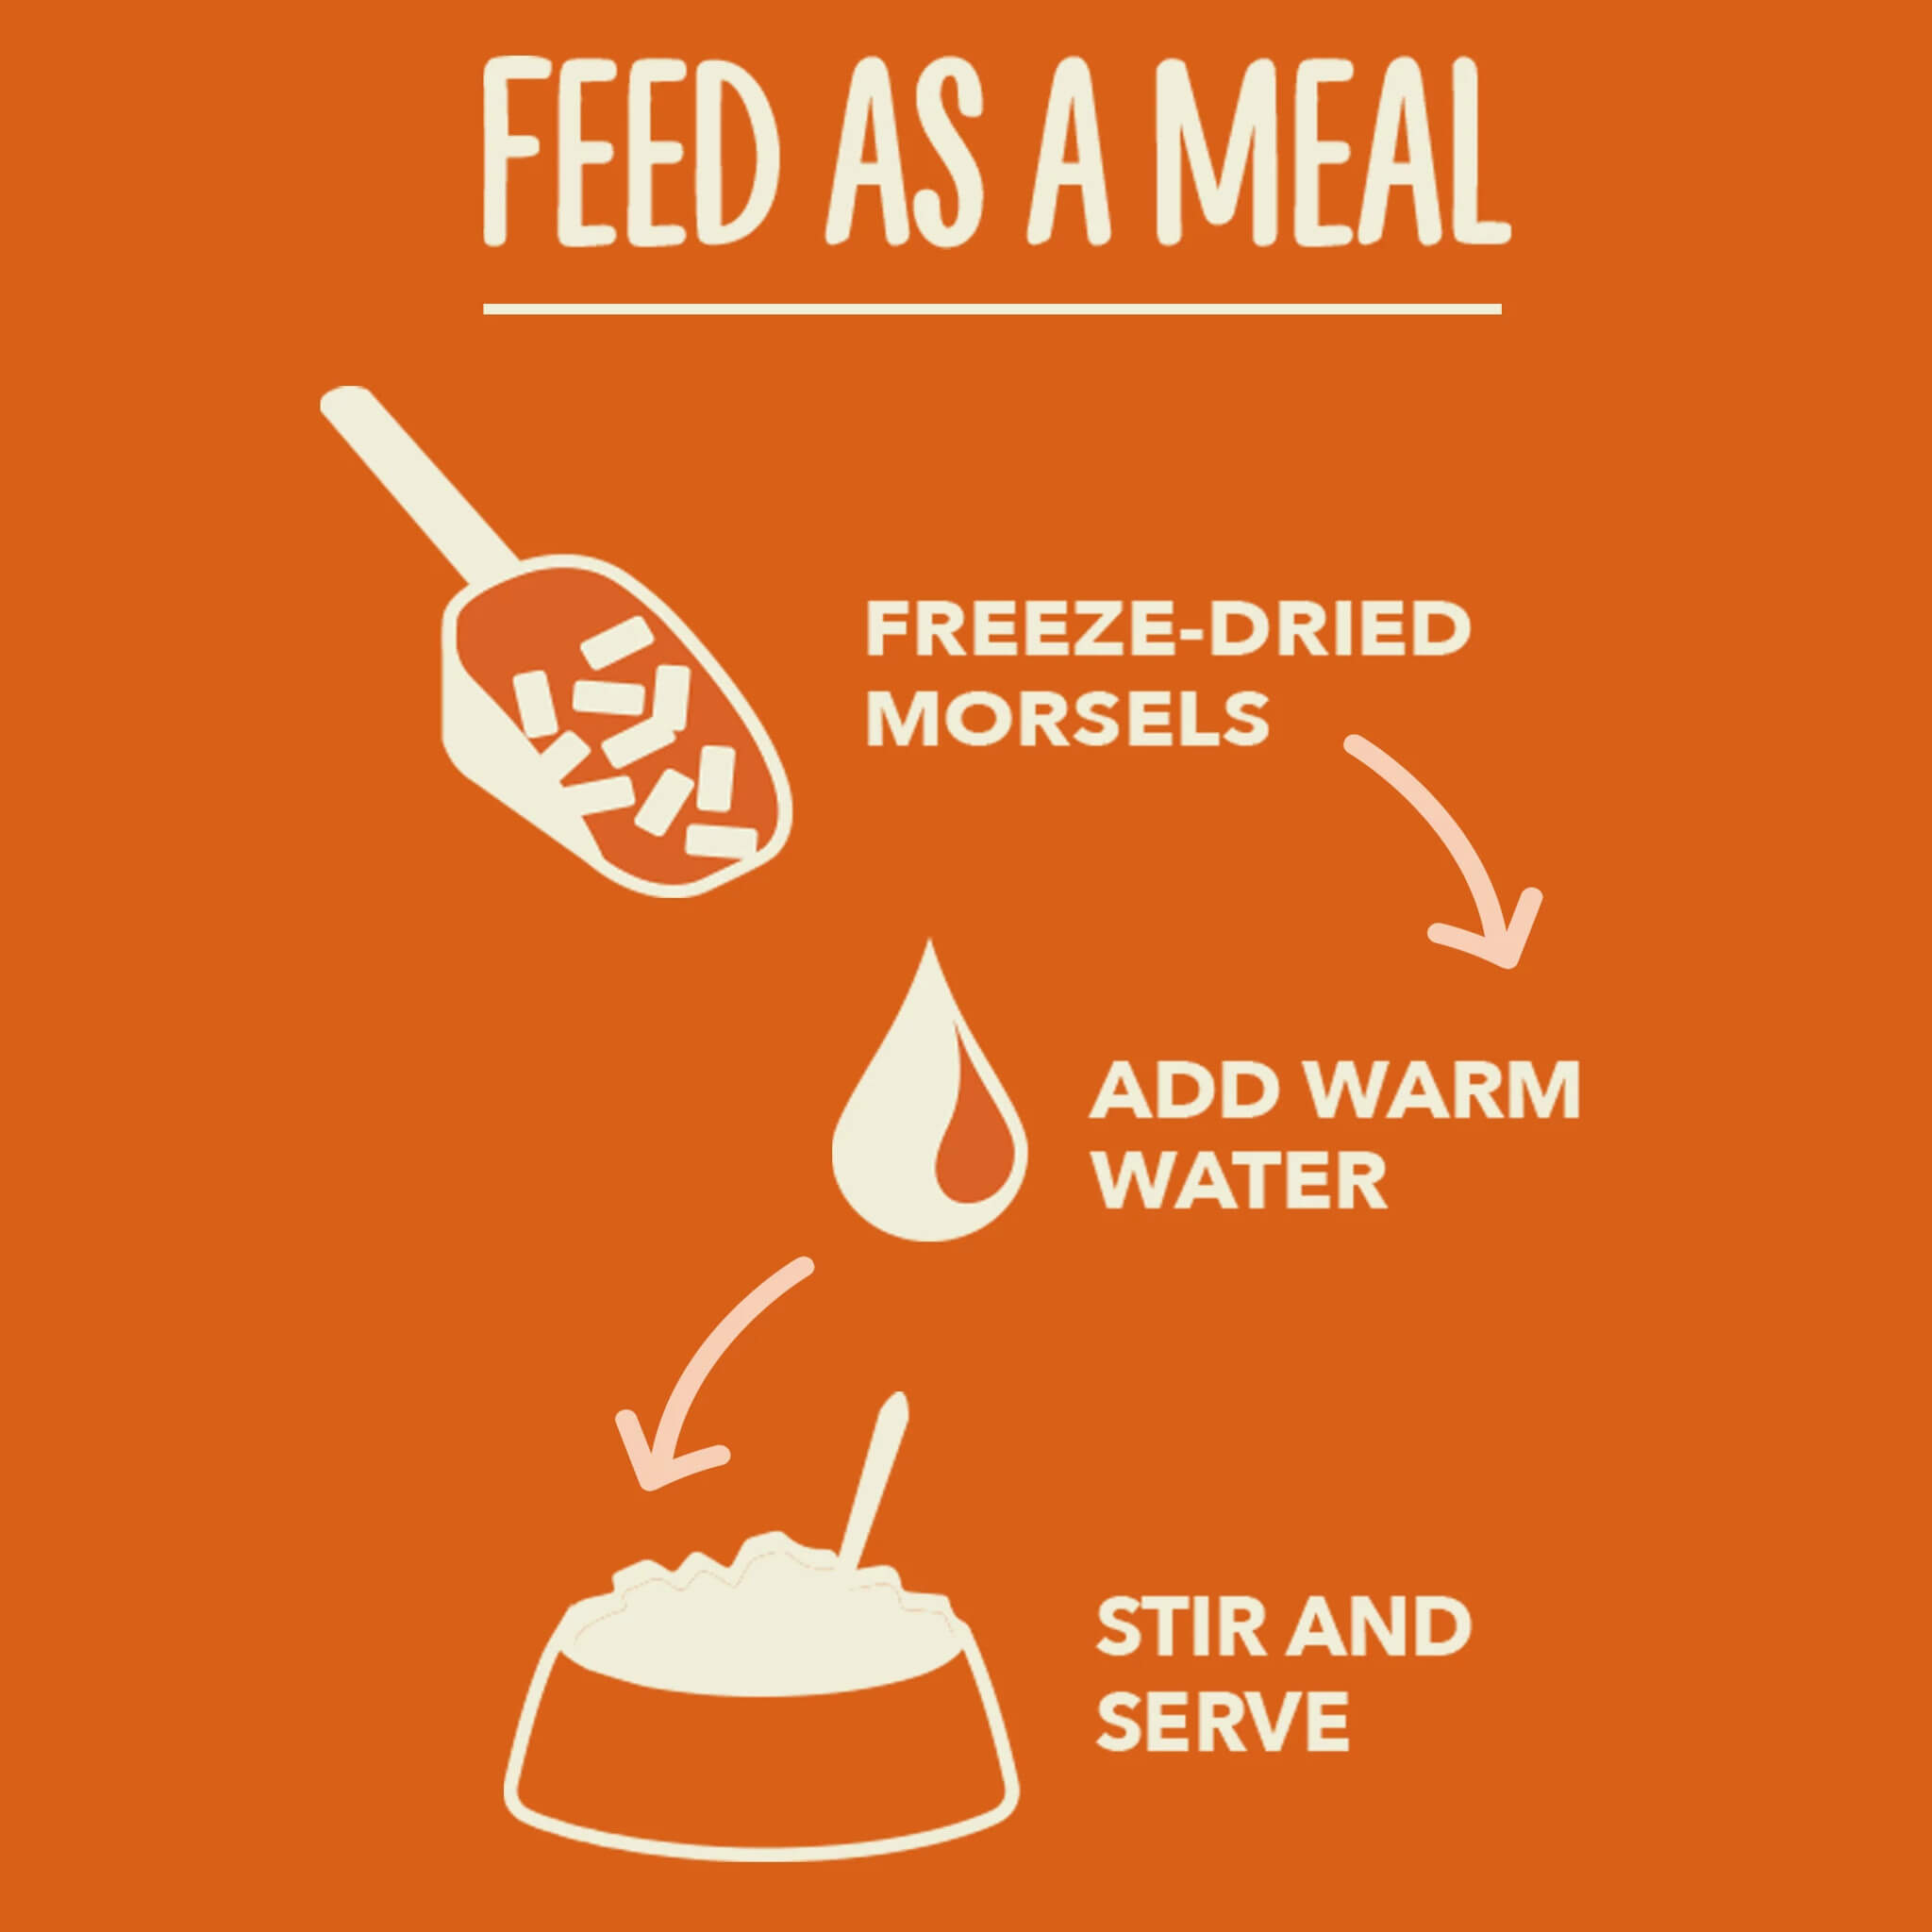 Feed as a meal